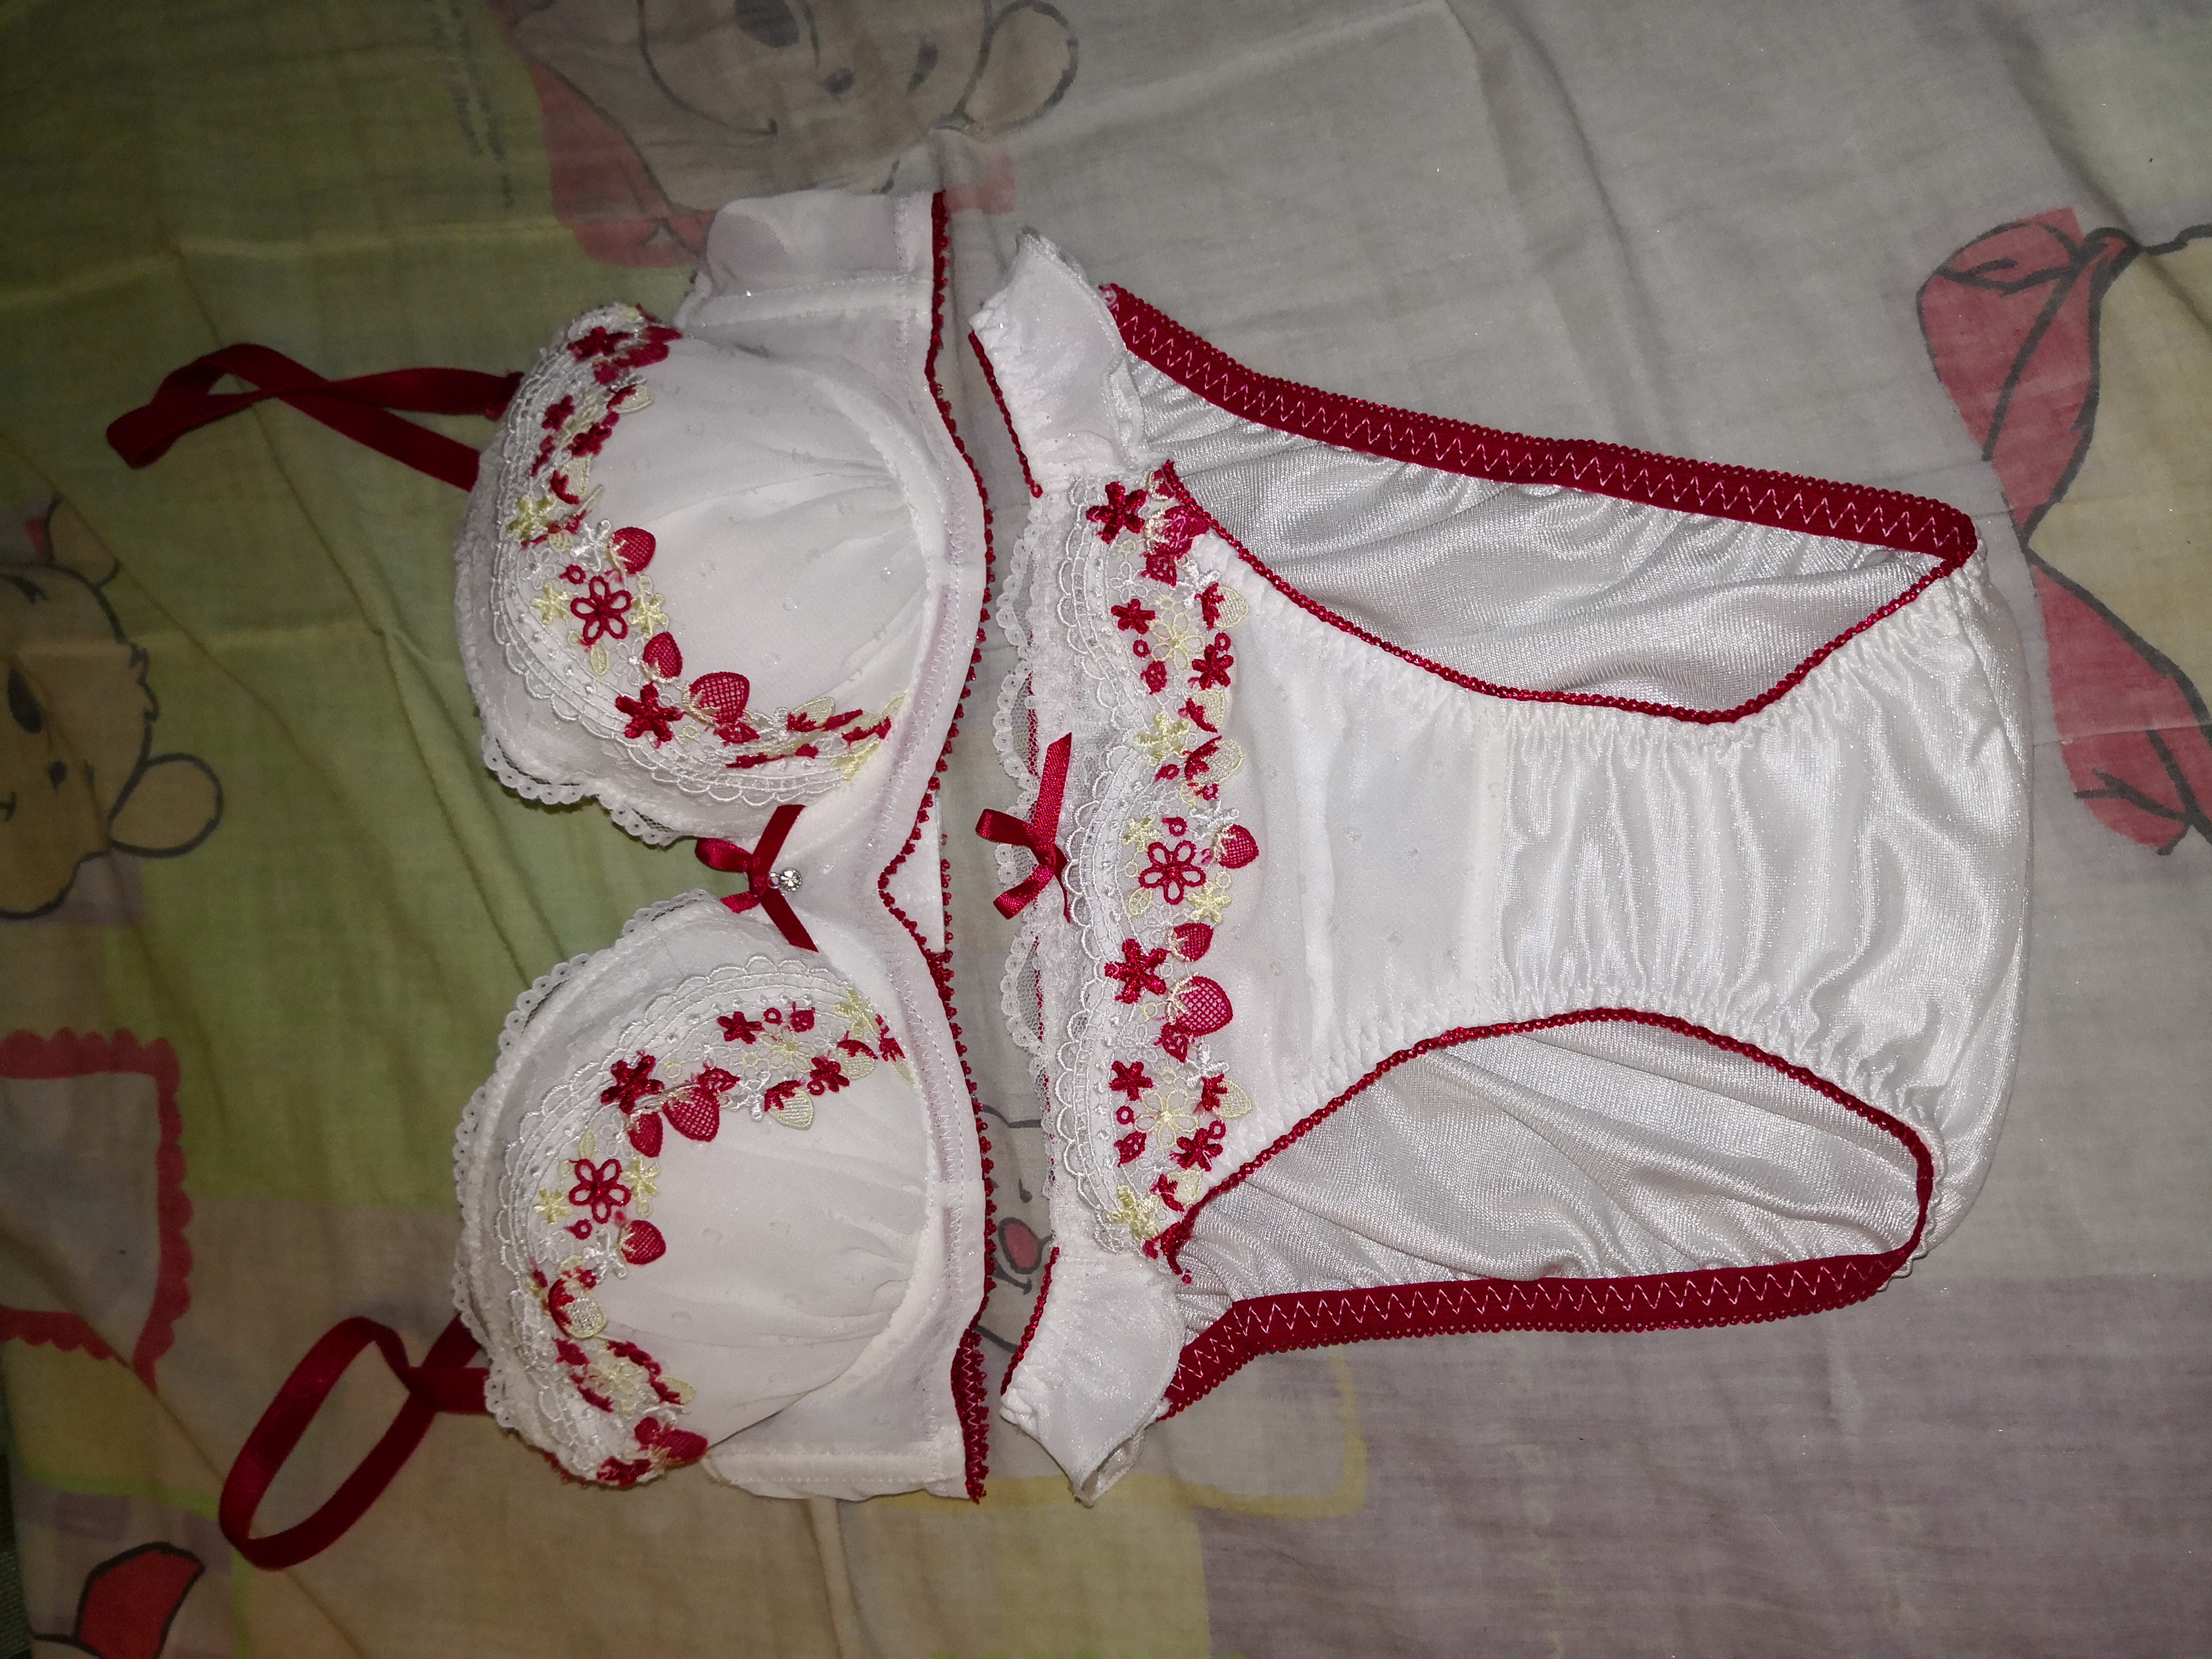 A LOVELY JAPAN WHITE RED STRAWBERRY PANTY WHEN WAS NEW AND CLEANING.